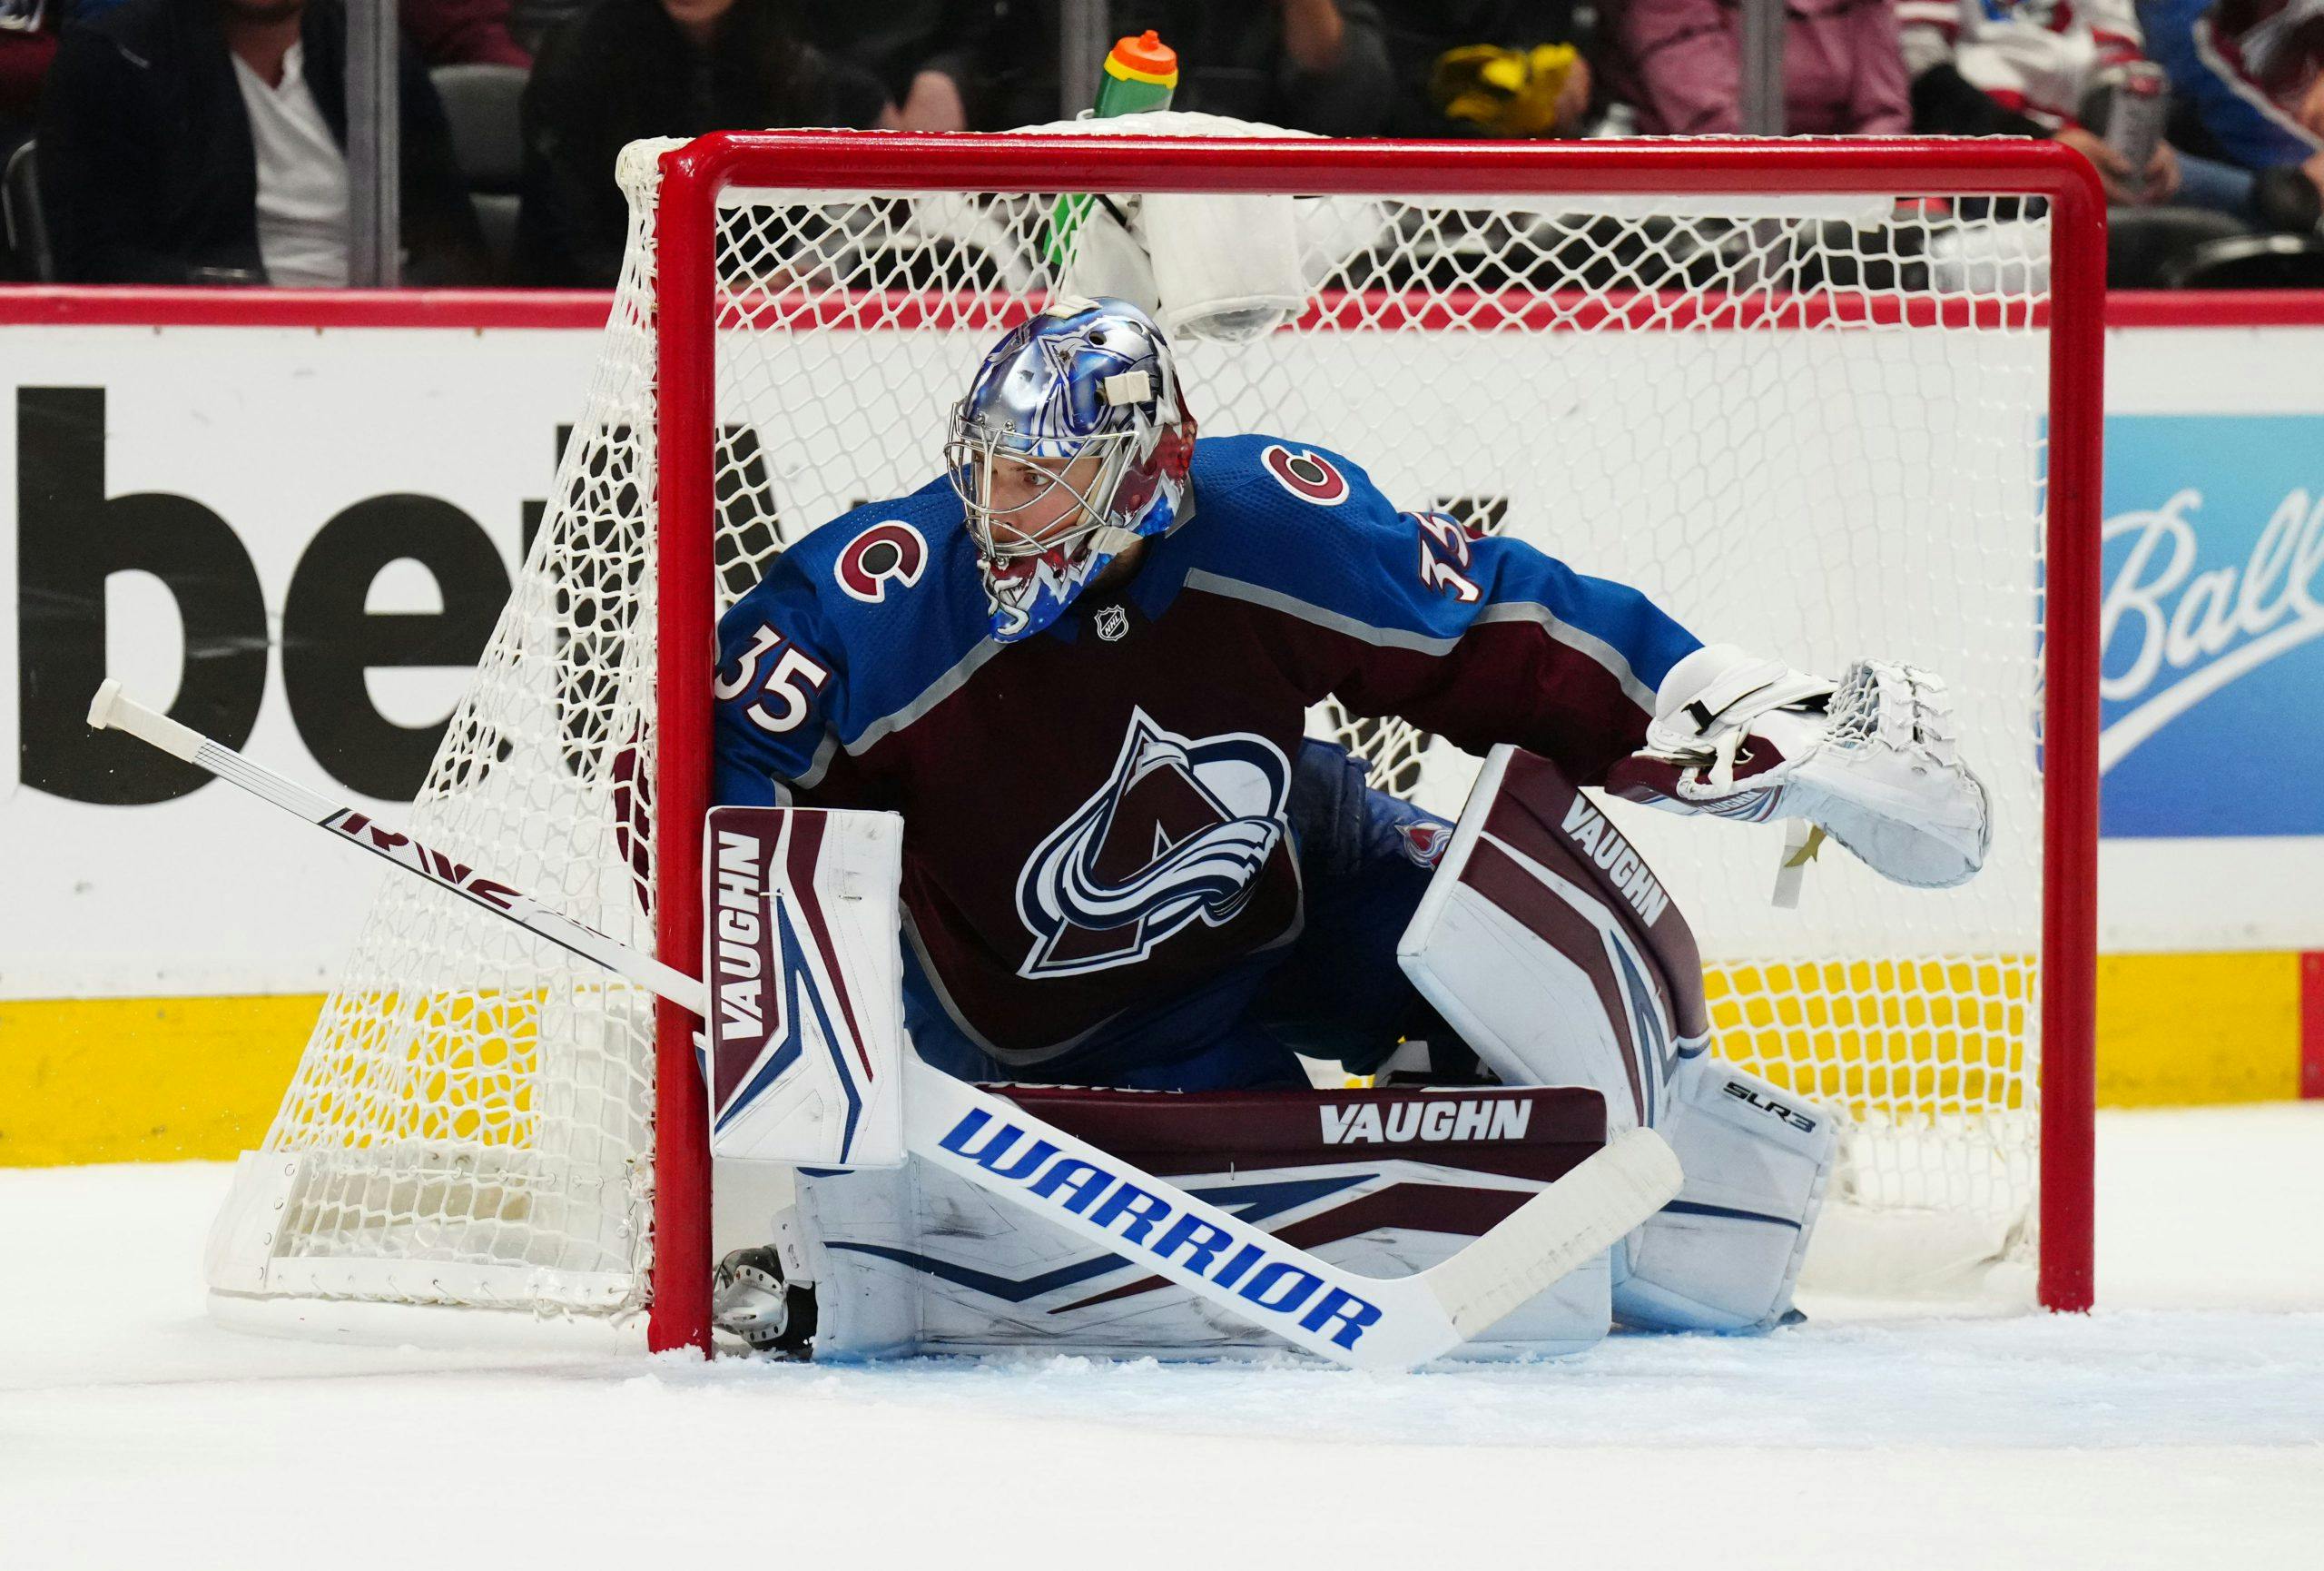 Avalanche goaltender Darcy Kuemper exits Game 1 vs. Oilers with upper-body injury, doubtful to return